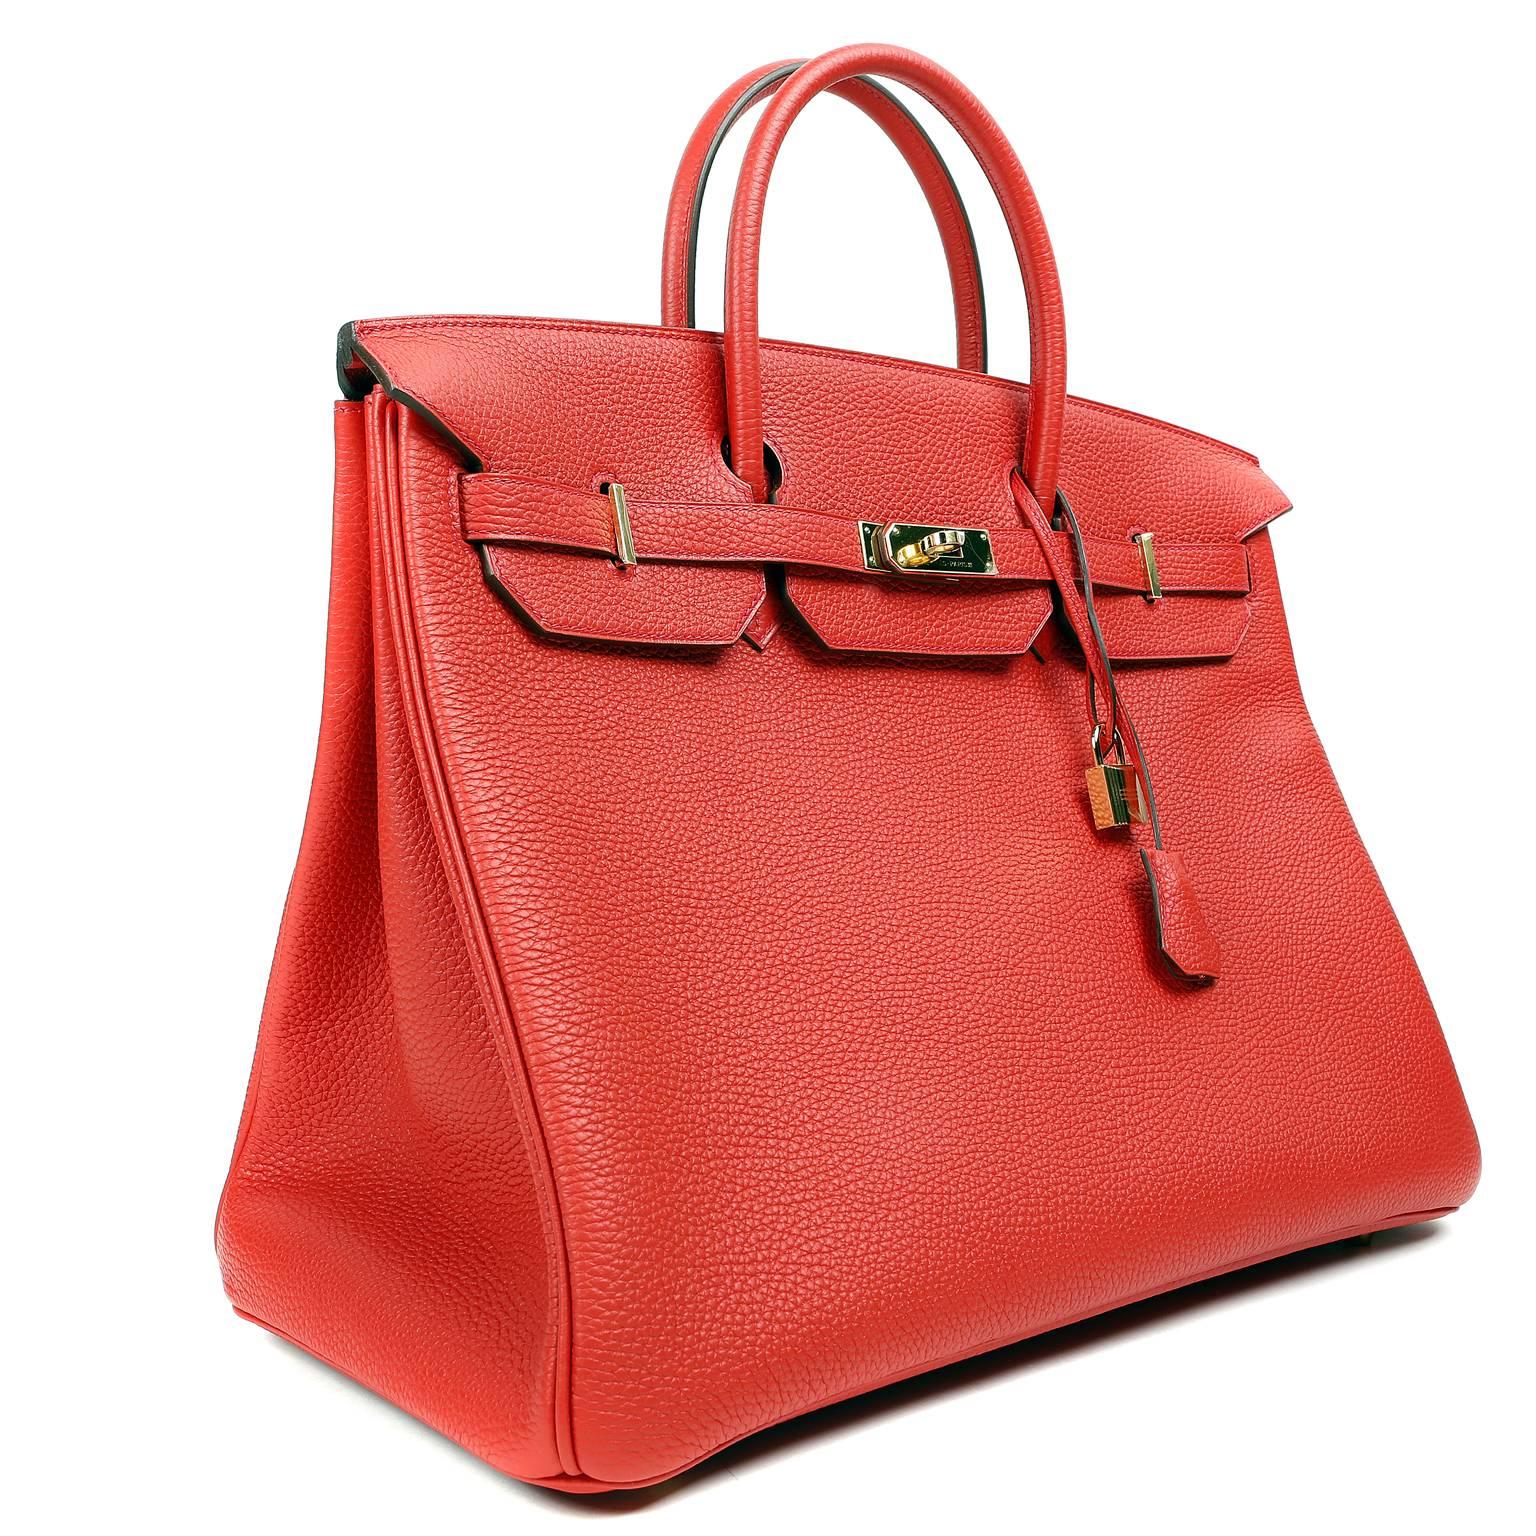 Hermès 40 cm Rouge Tomate Togo Birkin Bag- PRISTINE; Plastic on hardware 
New red for 2015-2016.   Vibrant “tomato red” color with gold hardware. 
Waitlists exceeding a year are commonplace for the intensely coveted Birkin bag.  Each piece is